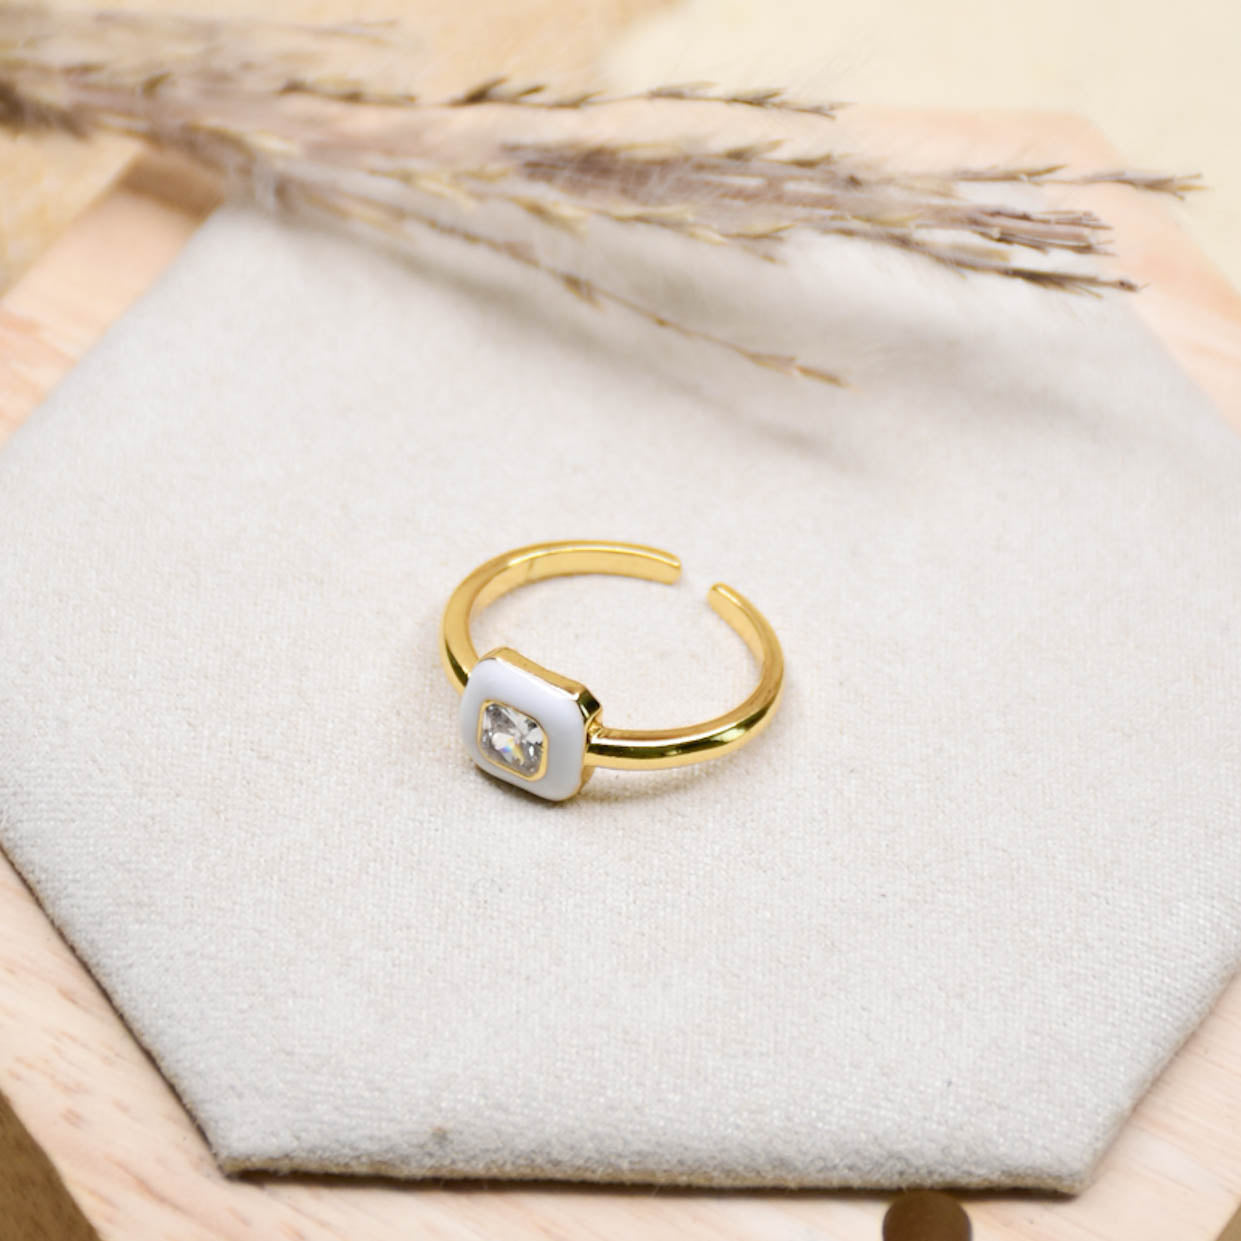 Golden Stone Ring. - The Merrythought